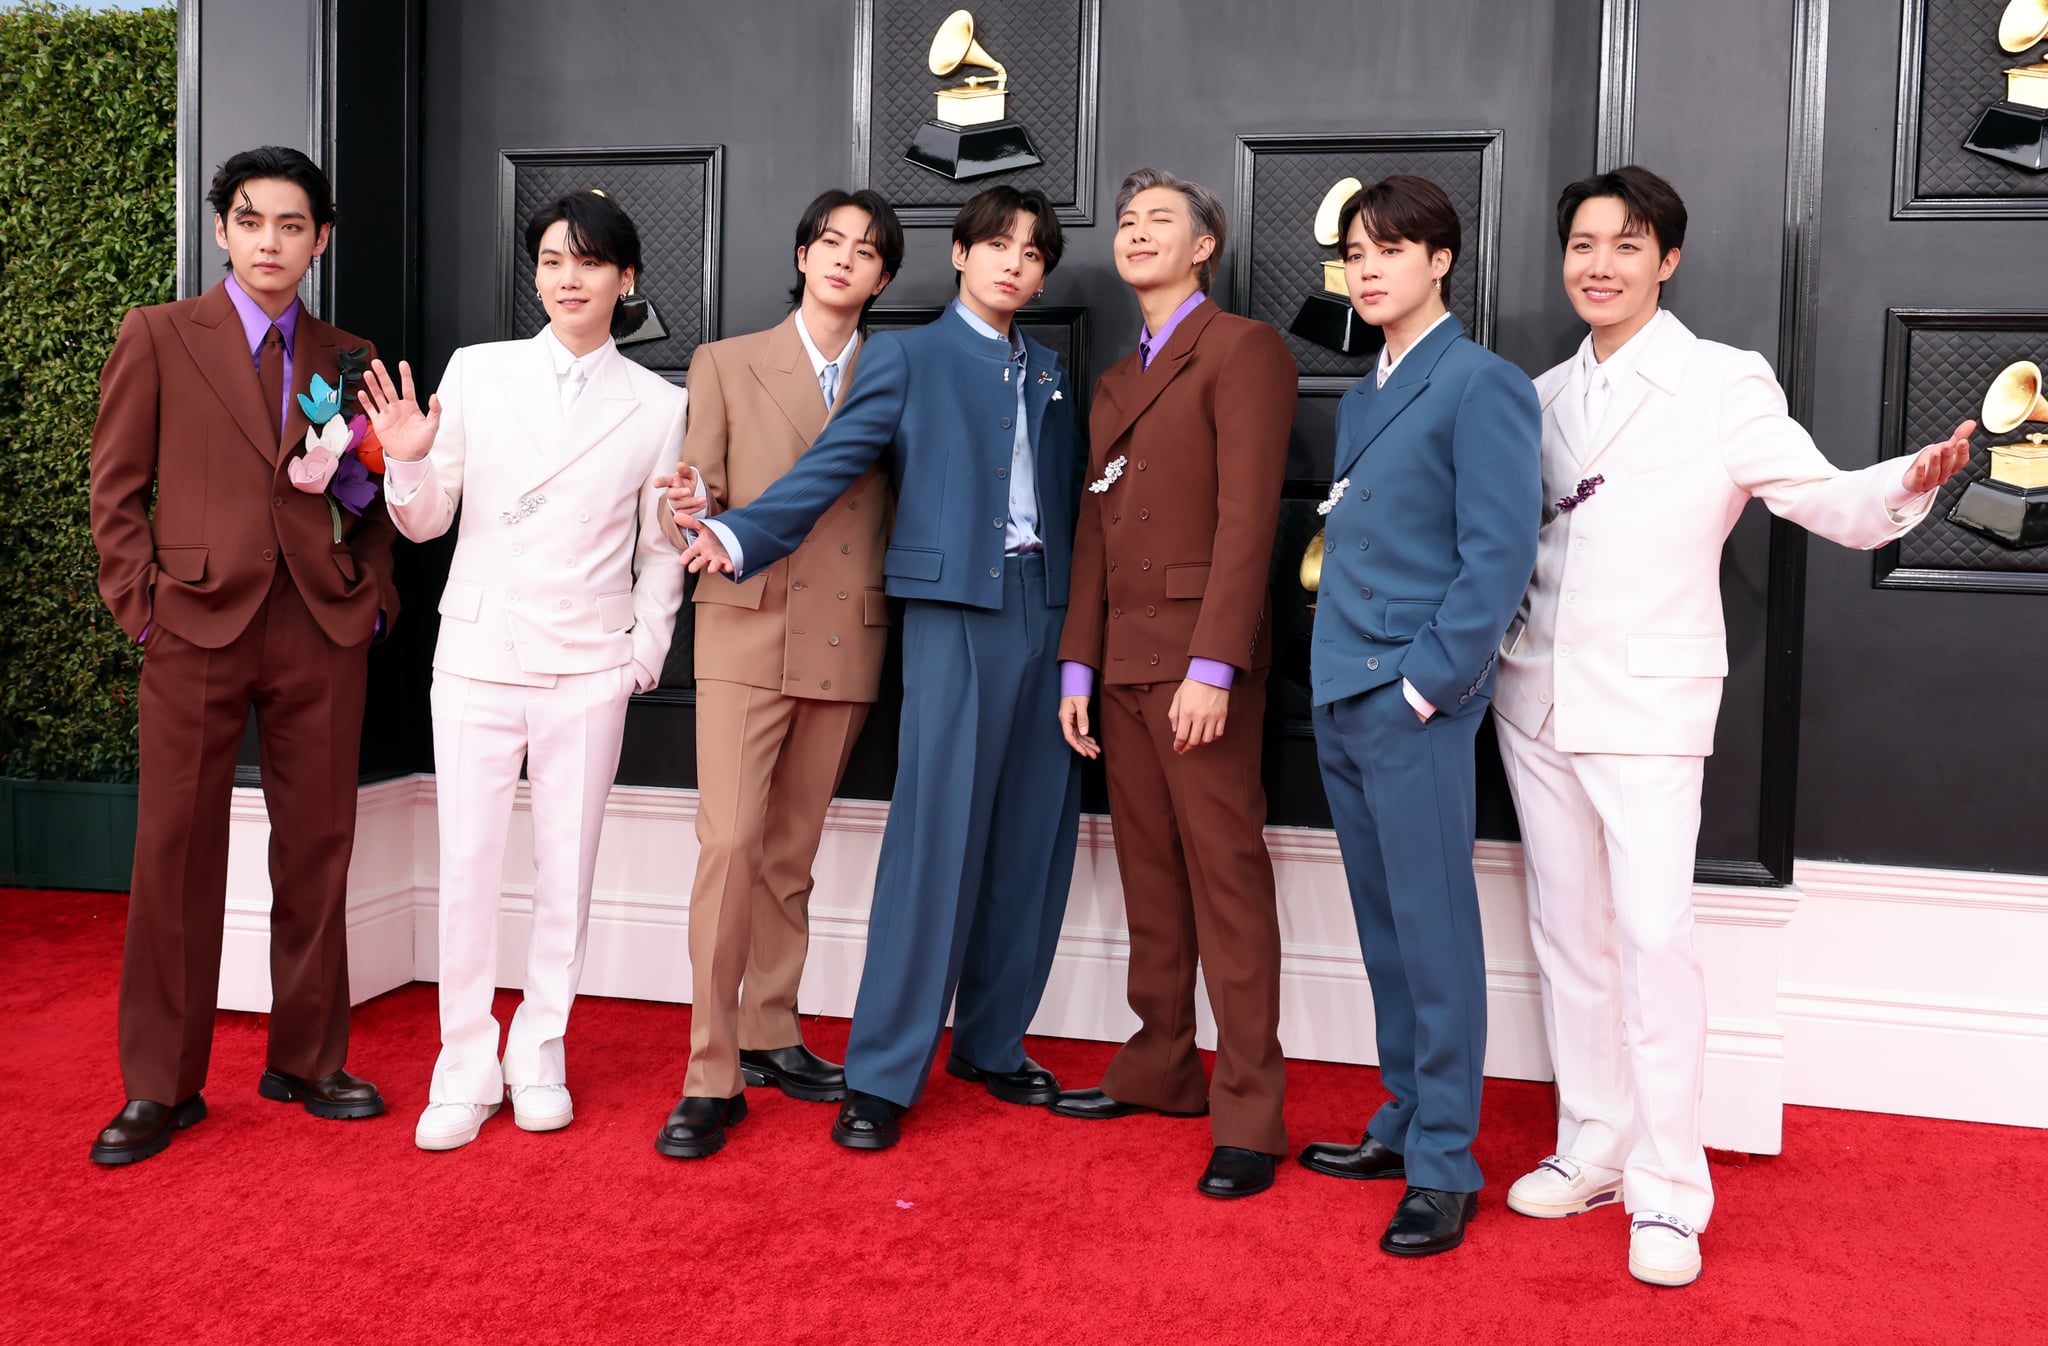 LAS VEGAS, NEVADA - APRIL 03: BTS attends the 64th Annual GRAMMY Awards at MGM Grand Garden Arena on April 03, 2022 in Las Vegas, Nevada. (Photo by Amy Sussman/Getty Images)